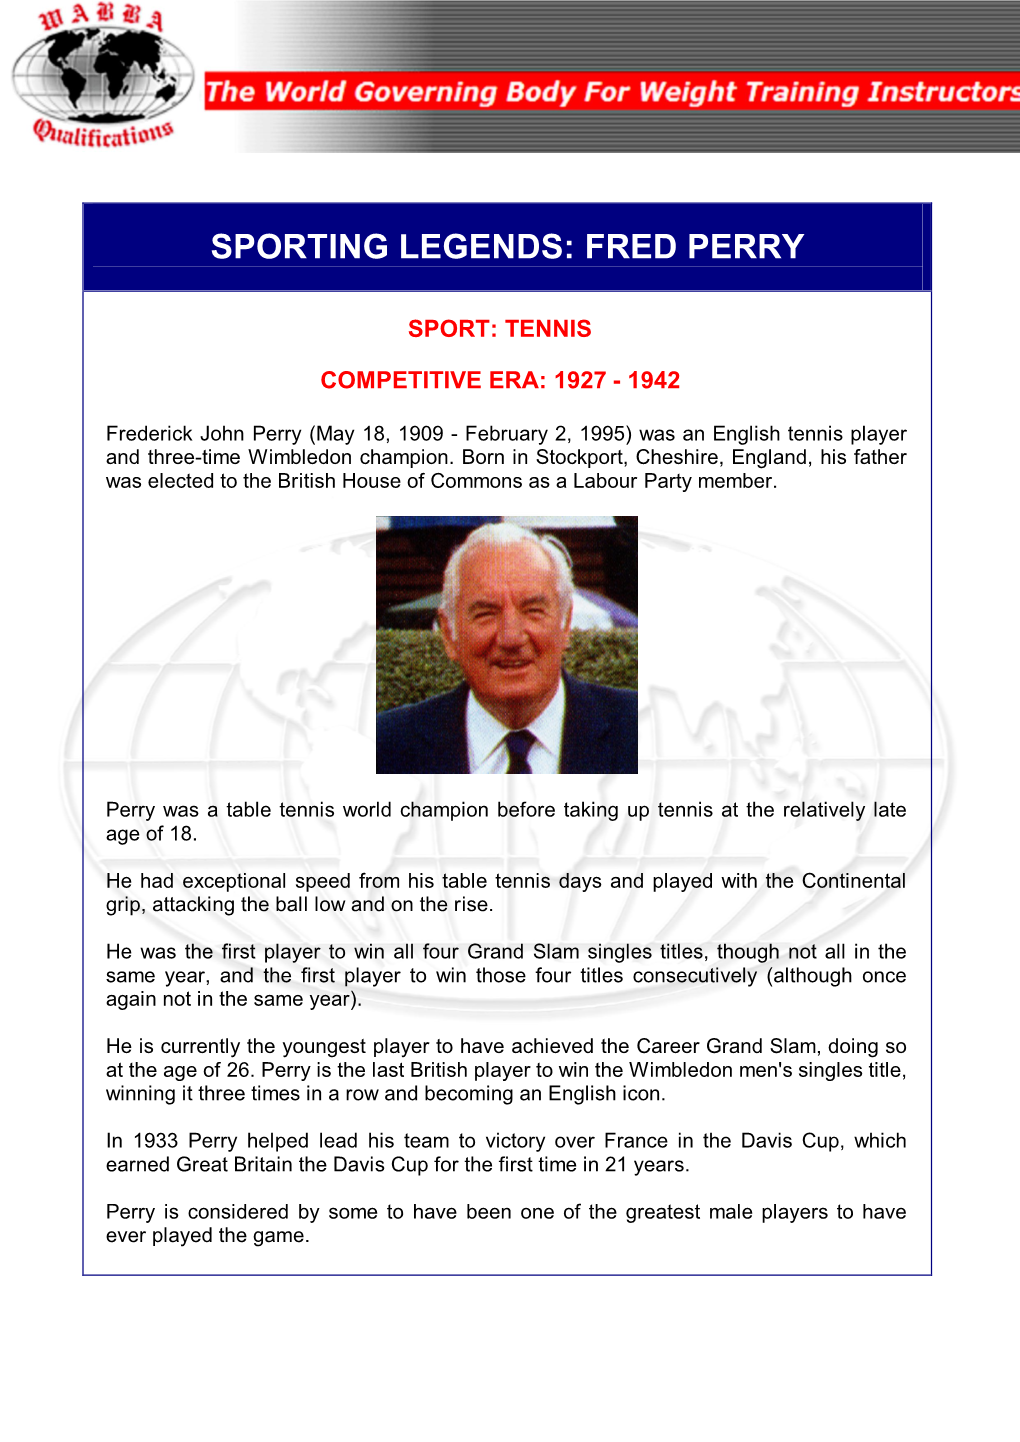 Sporting Legends: Fred Perry